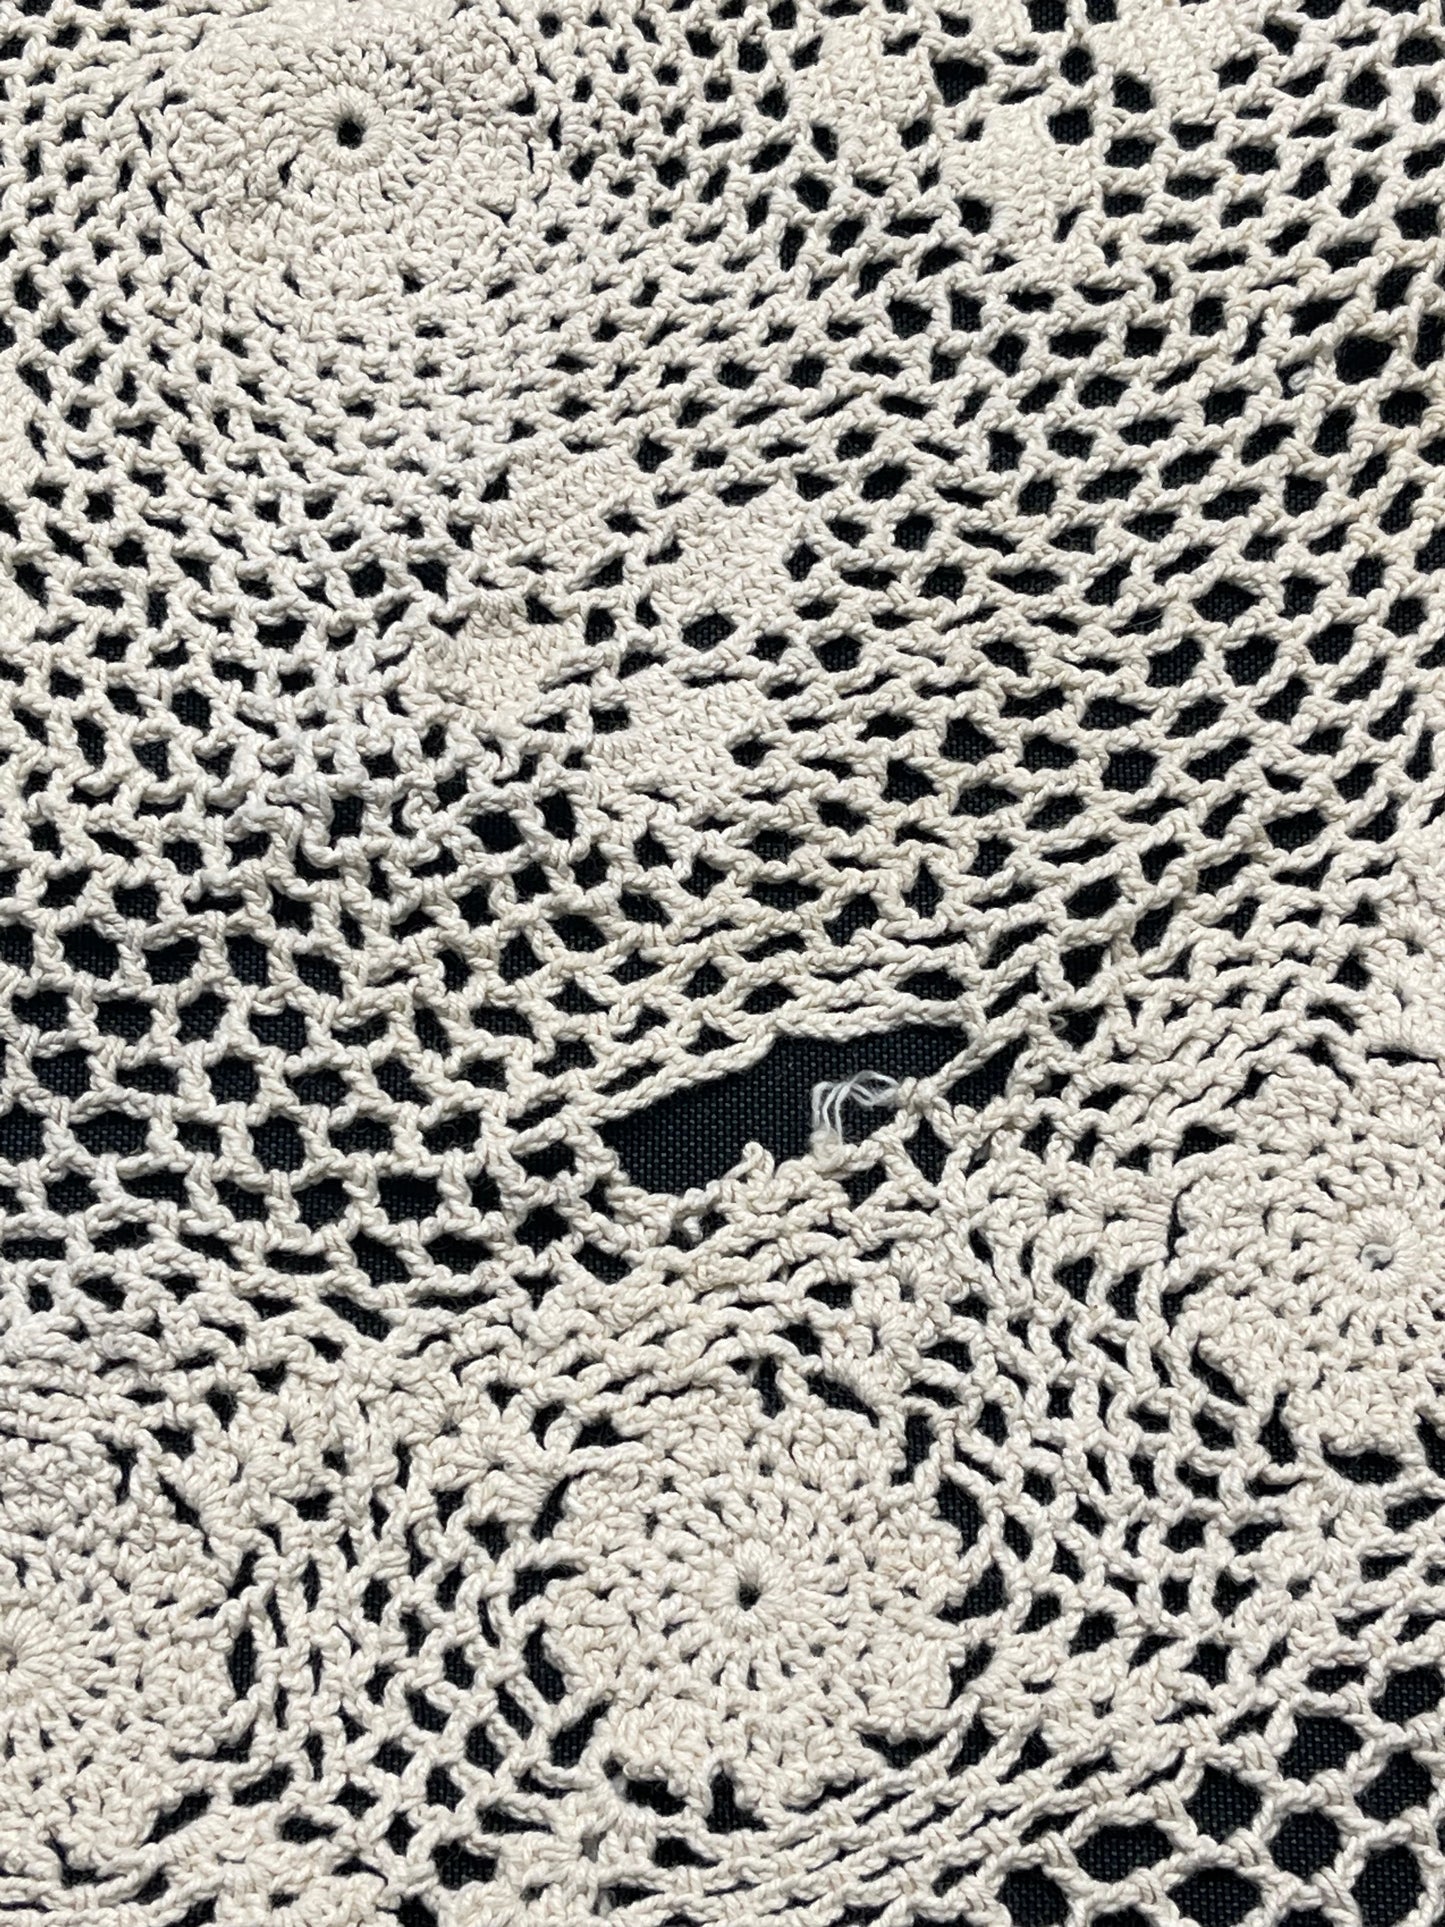 Crocheted Lace Round Tablecloth